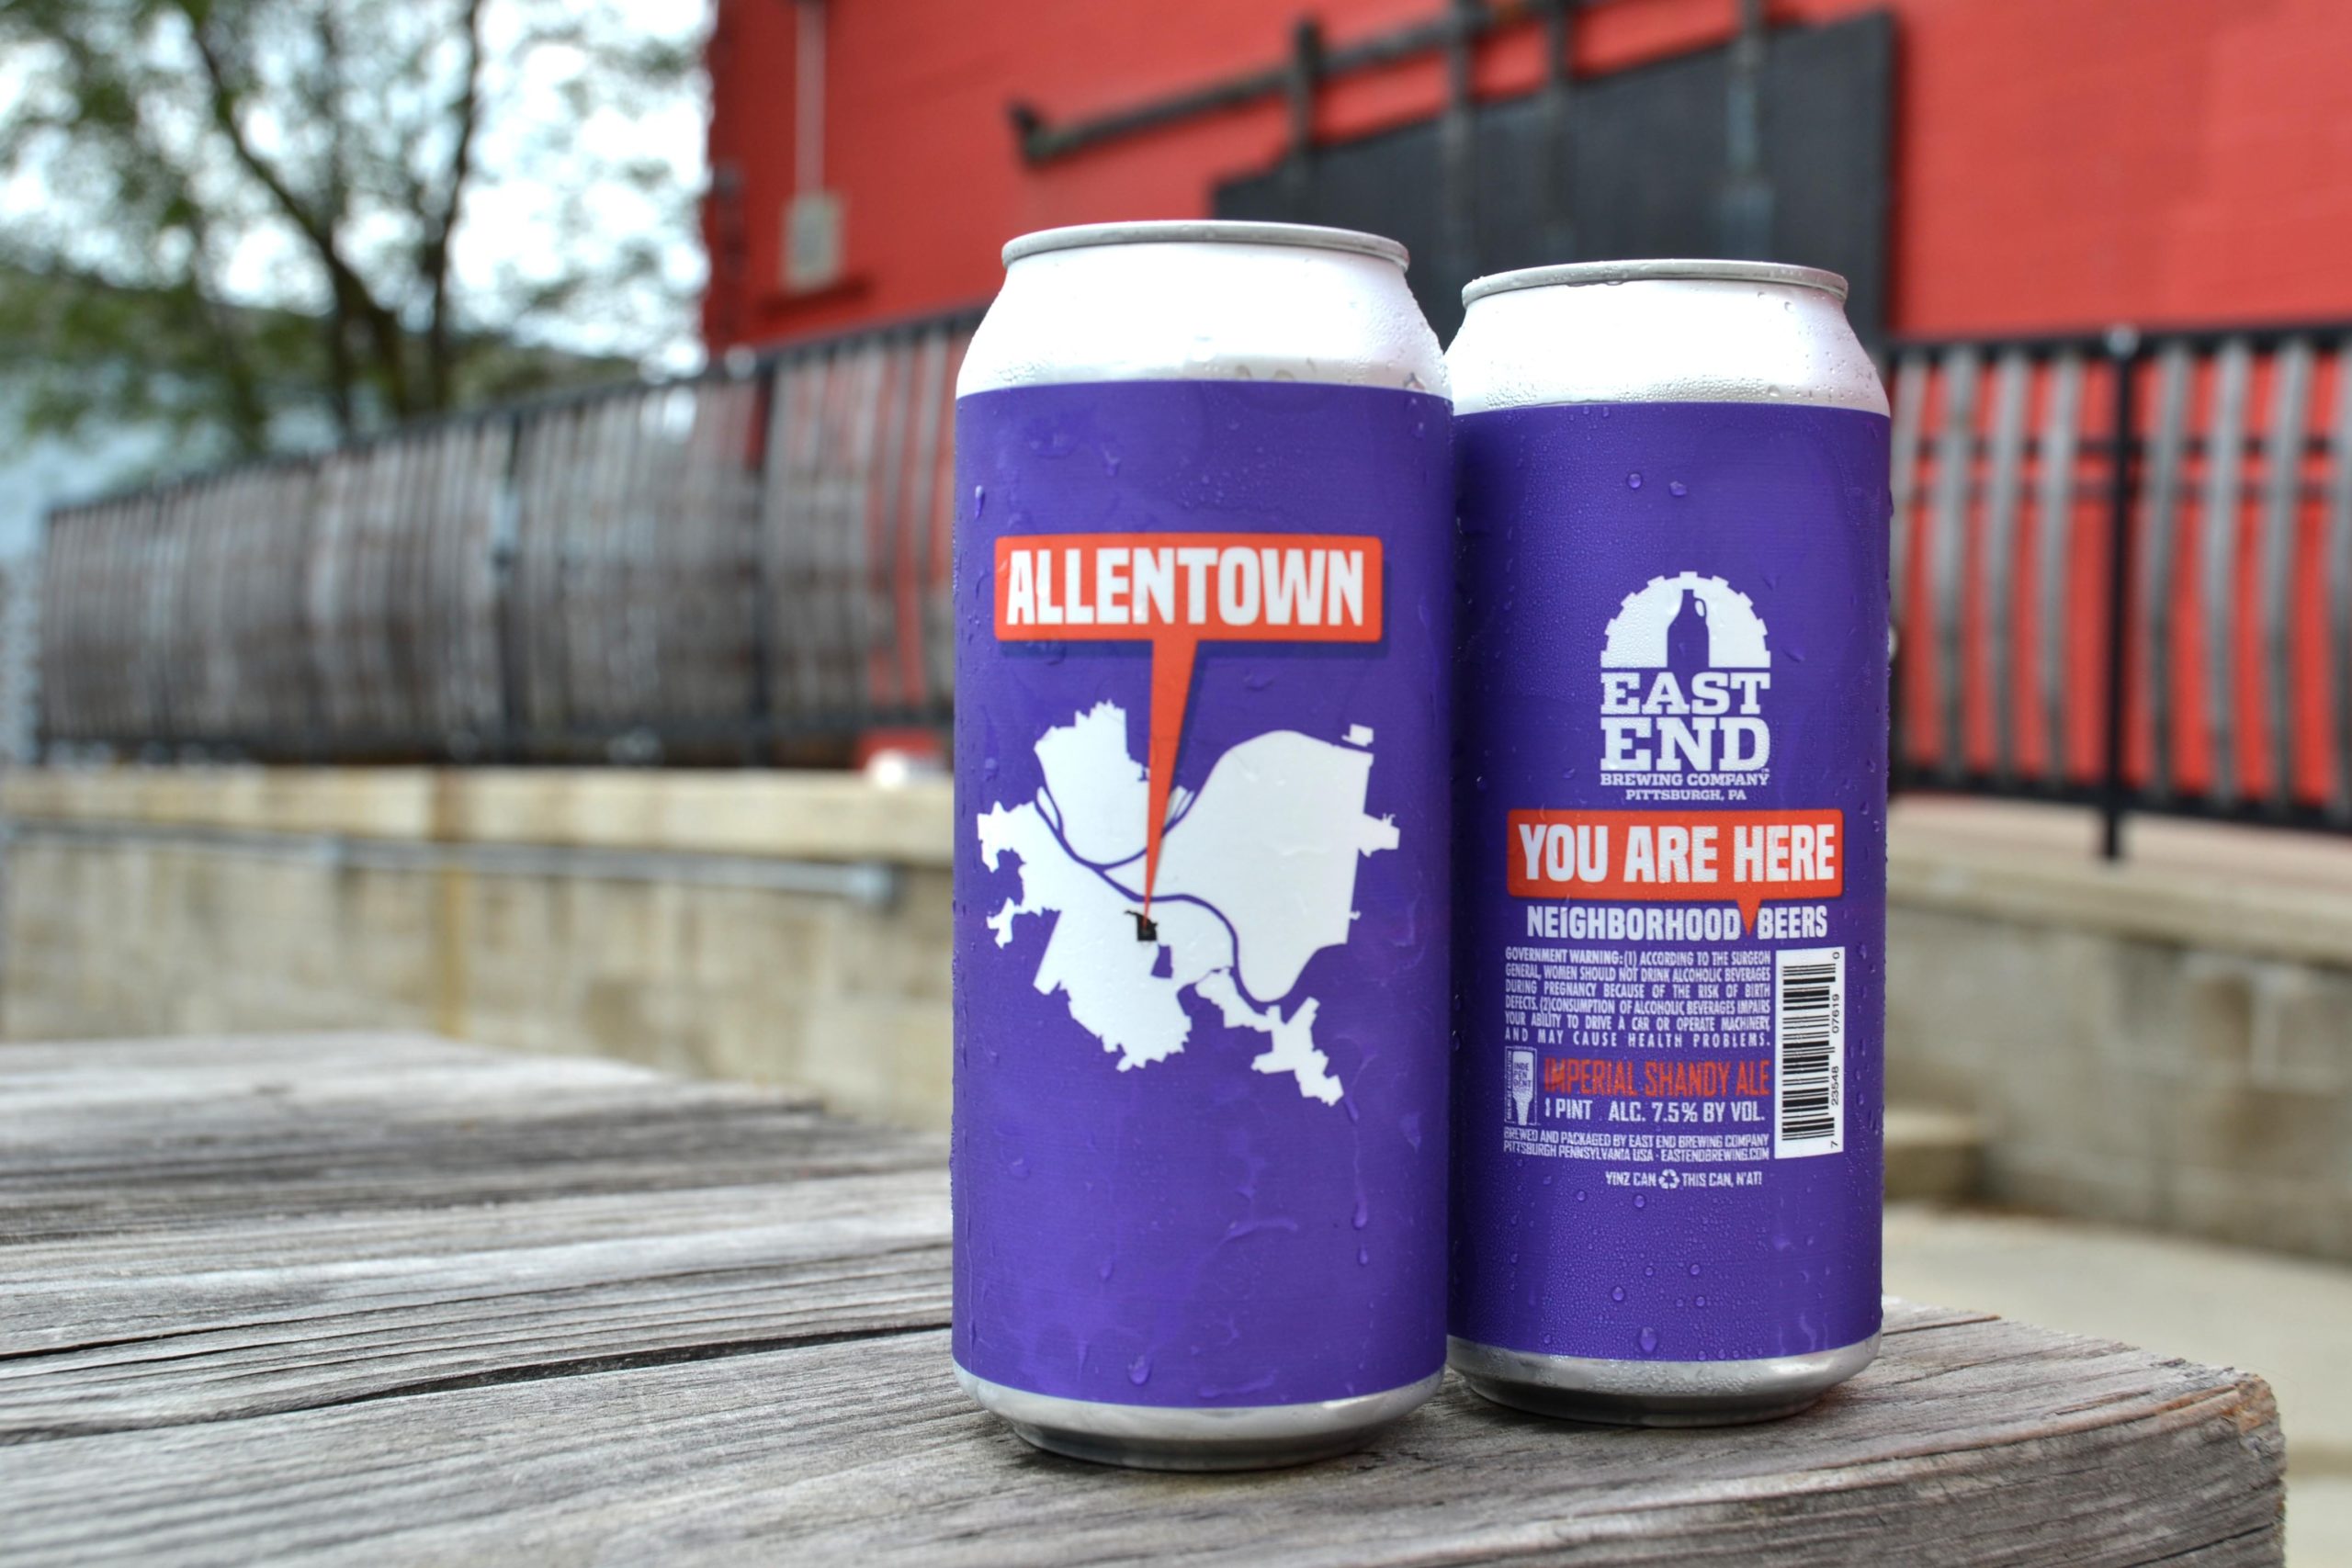 East End's 'YOU ARE HERE' series debuts with a beer that celebrates the Allentown neighborhood of Pittsburgh.